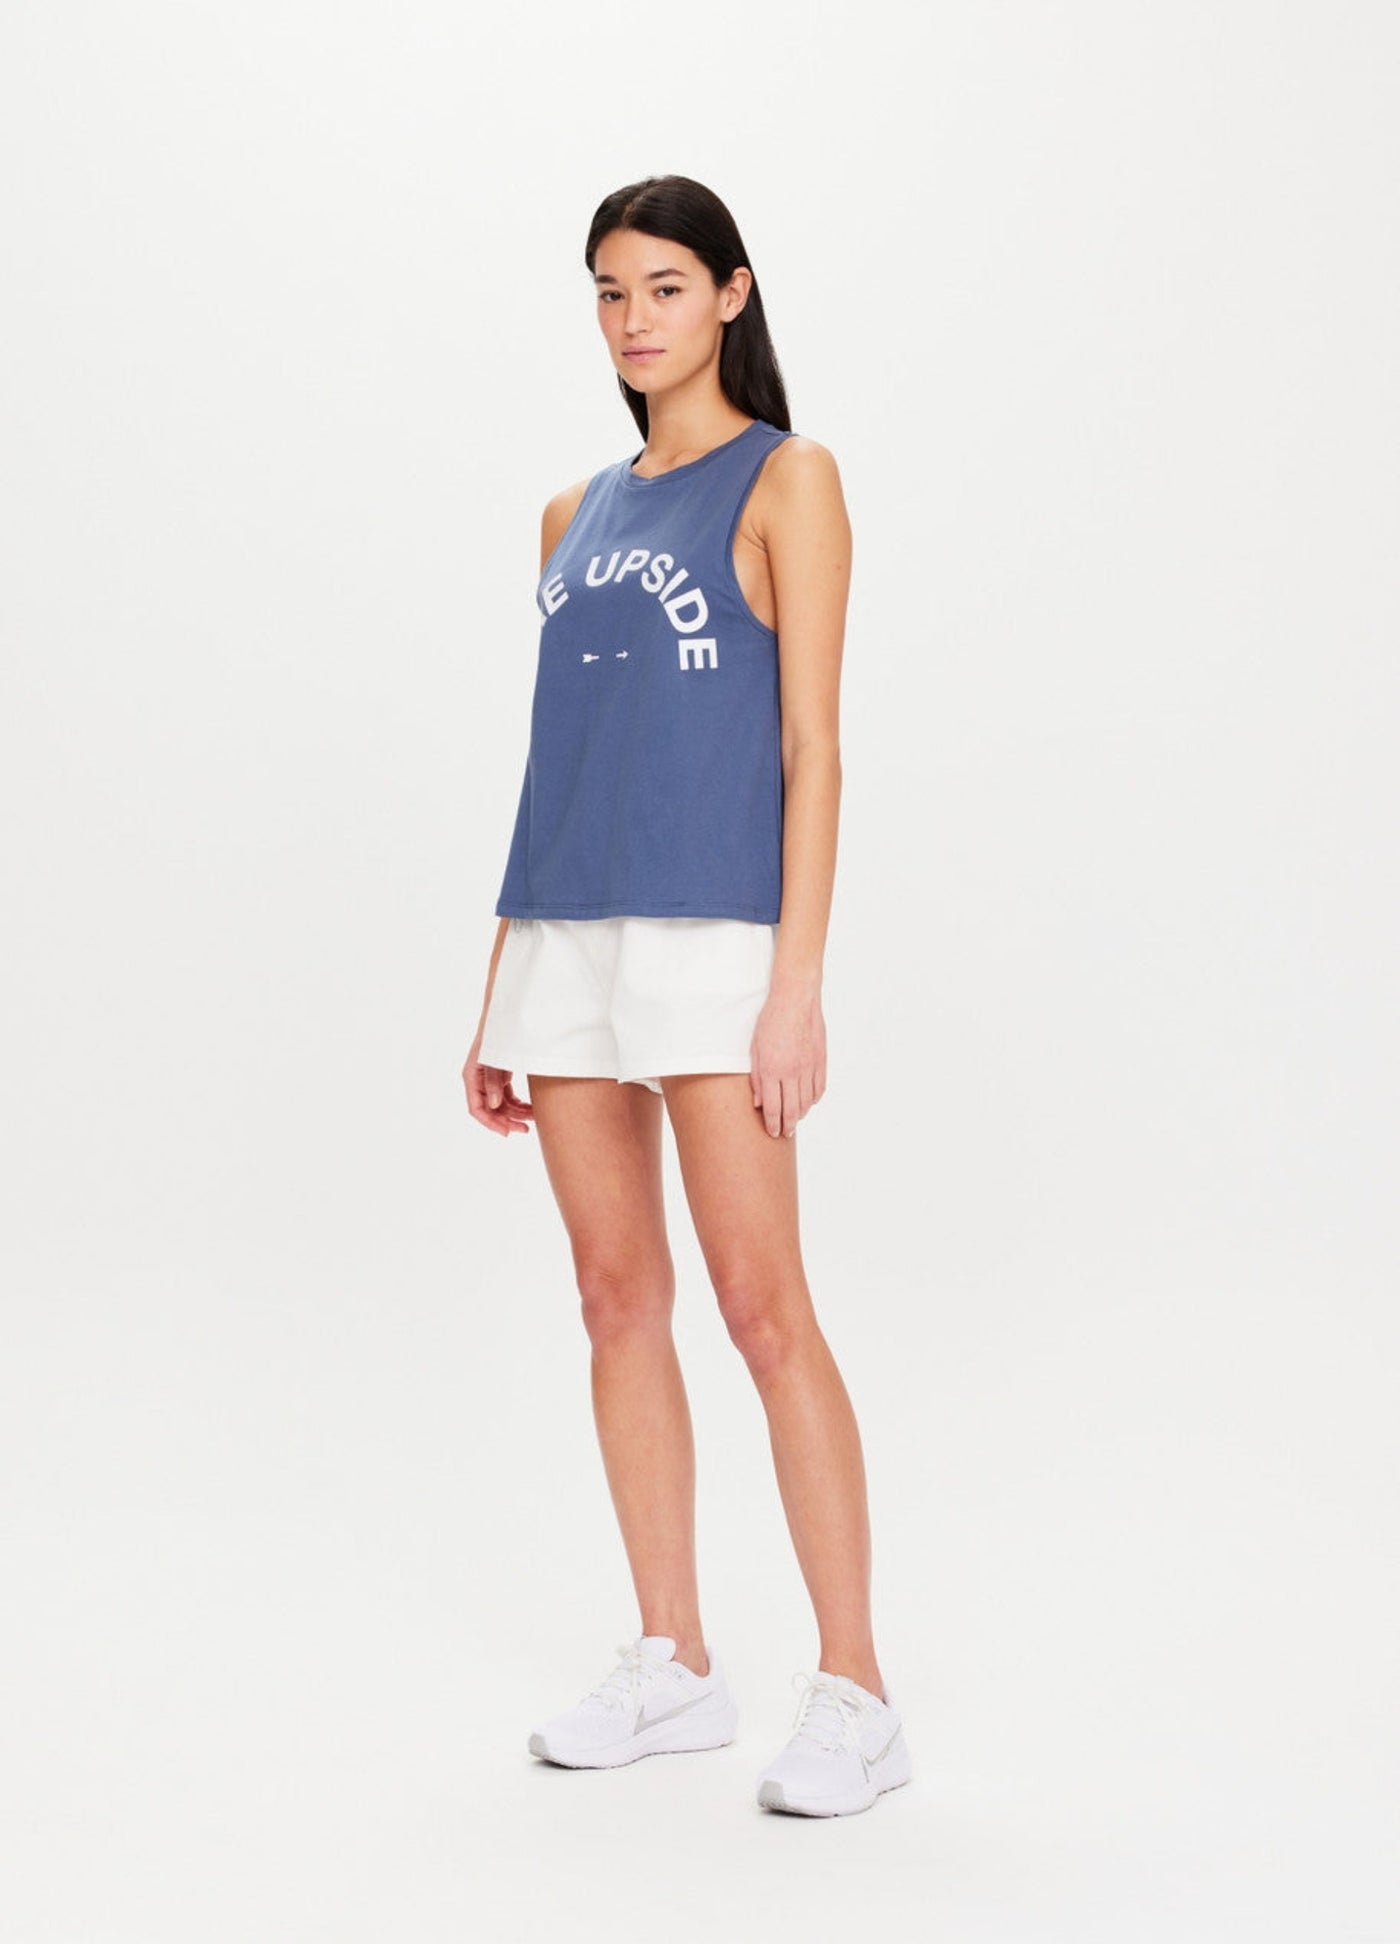 The Upside Sarah Tank in Pool Blue 100% Cotton with Logo design